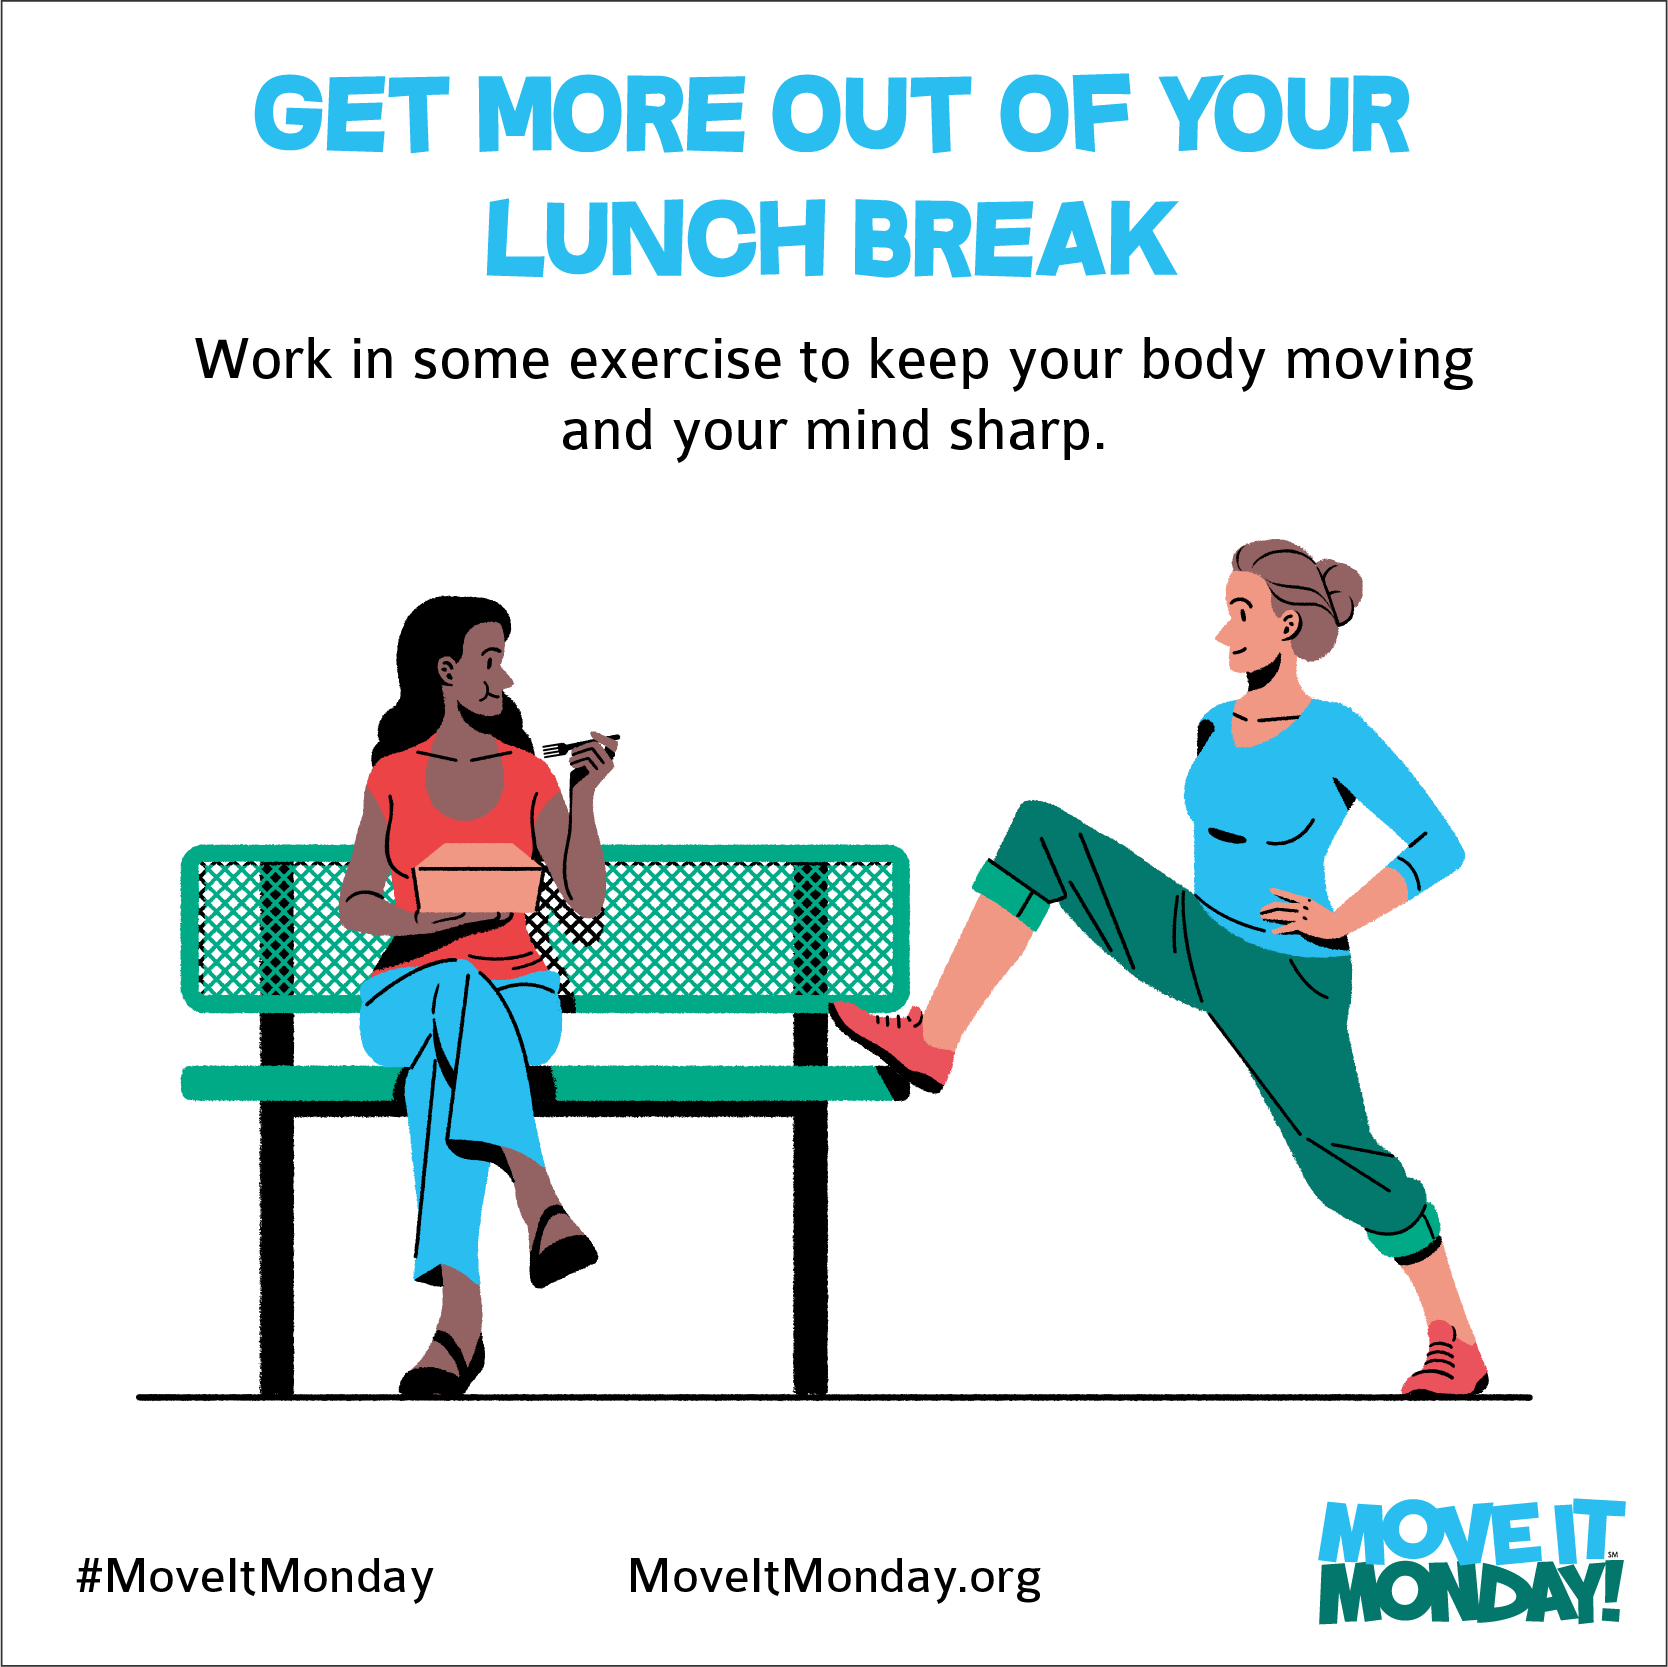 Move It Monday - Lunch Break Workout Routine for More Energy